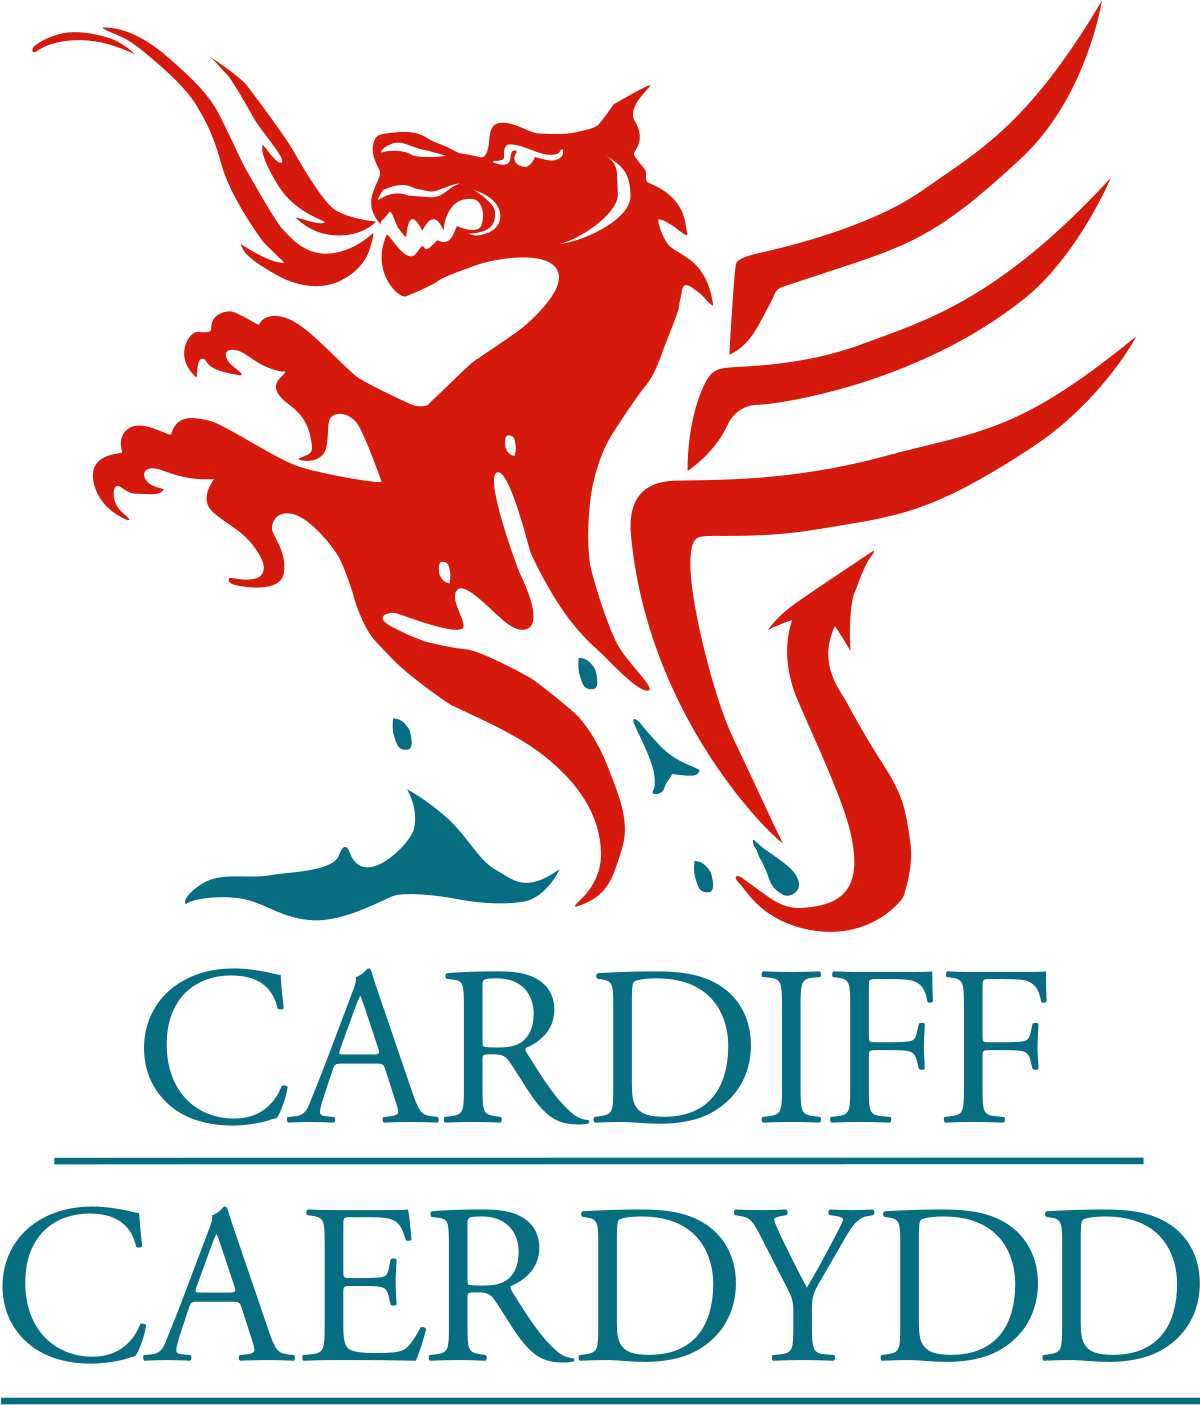 The logo for Cardiff Council